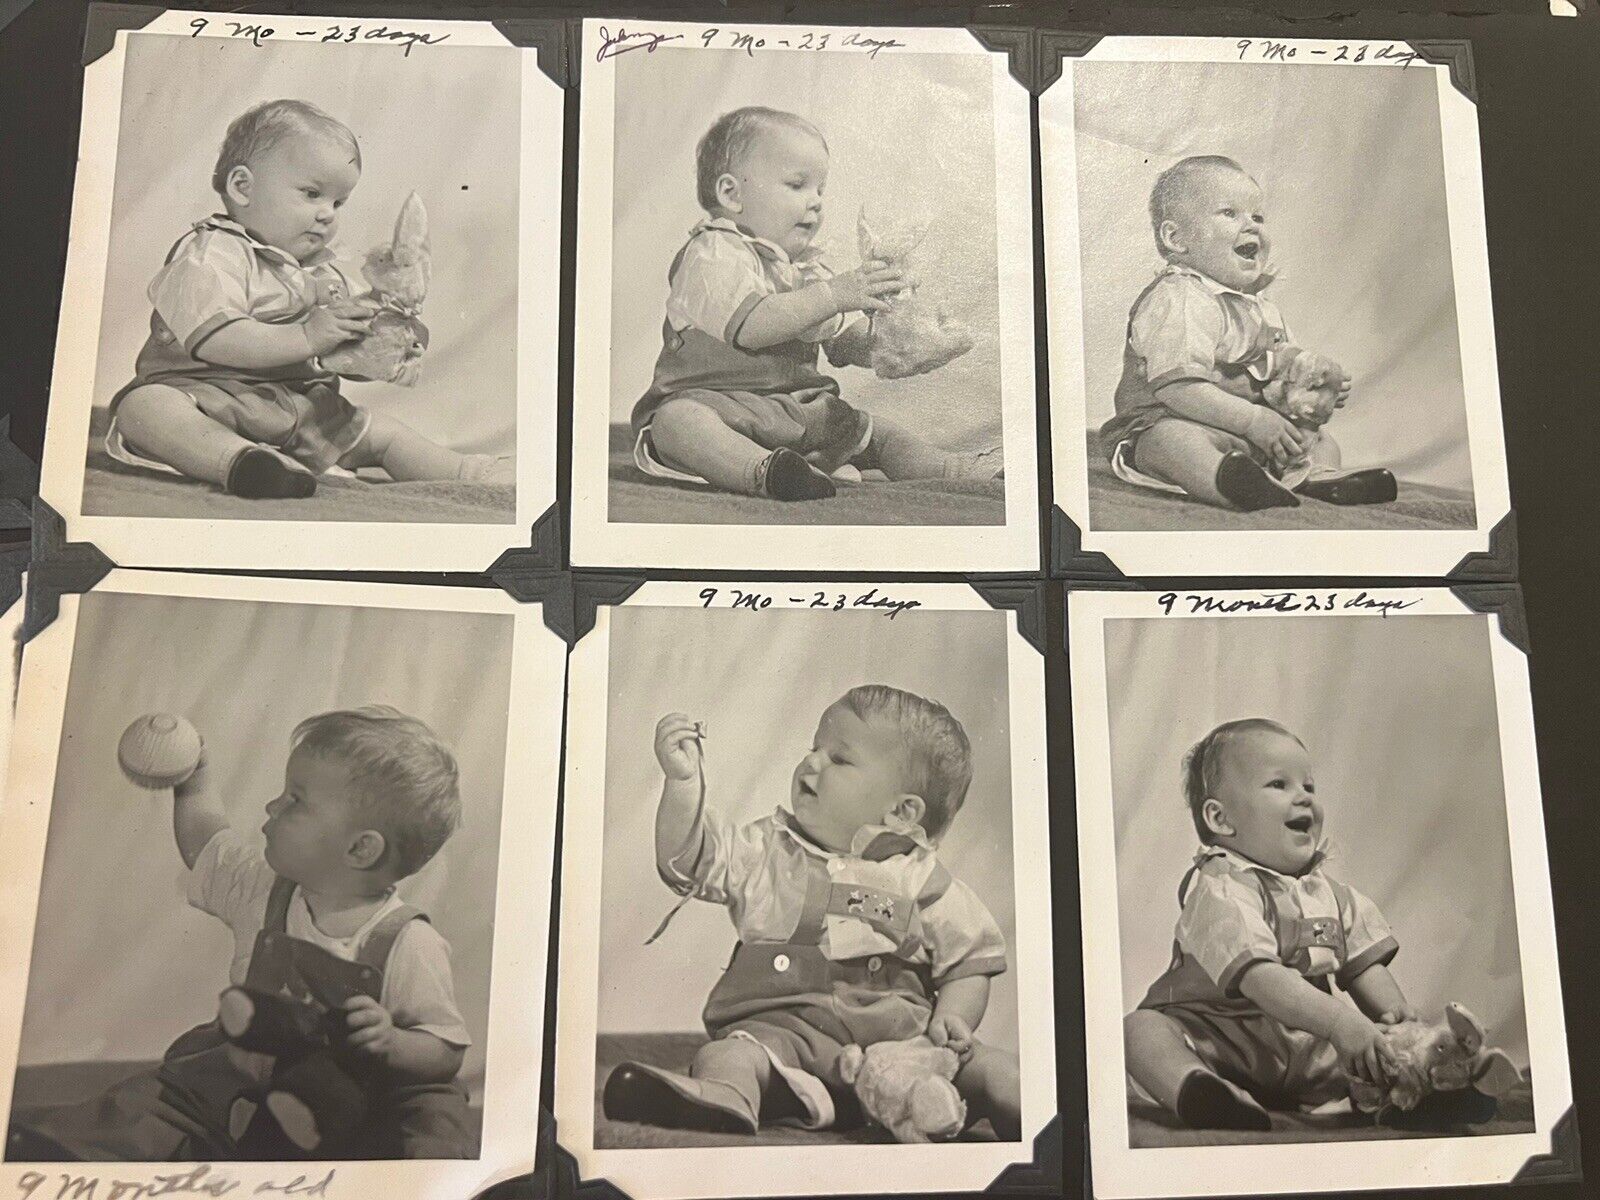 Vintage Family Photo Album 1930s Lots of Adorable Baby Photos